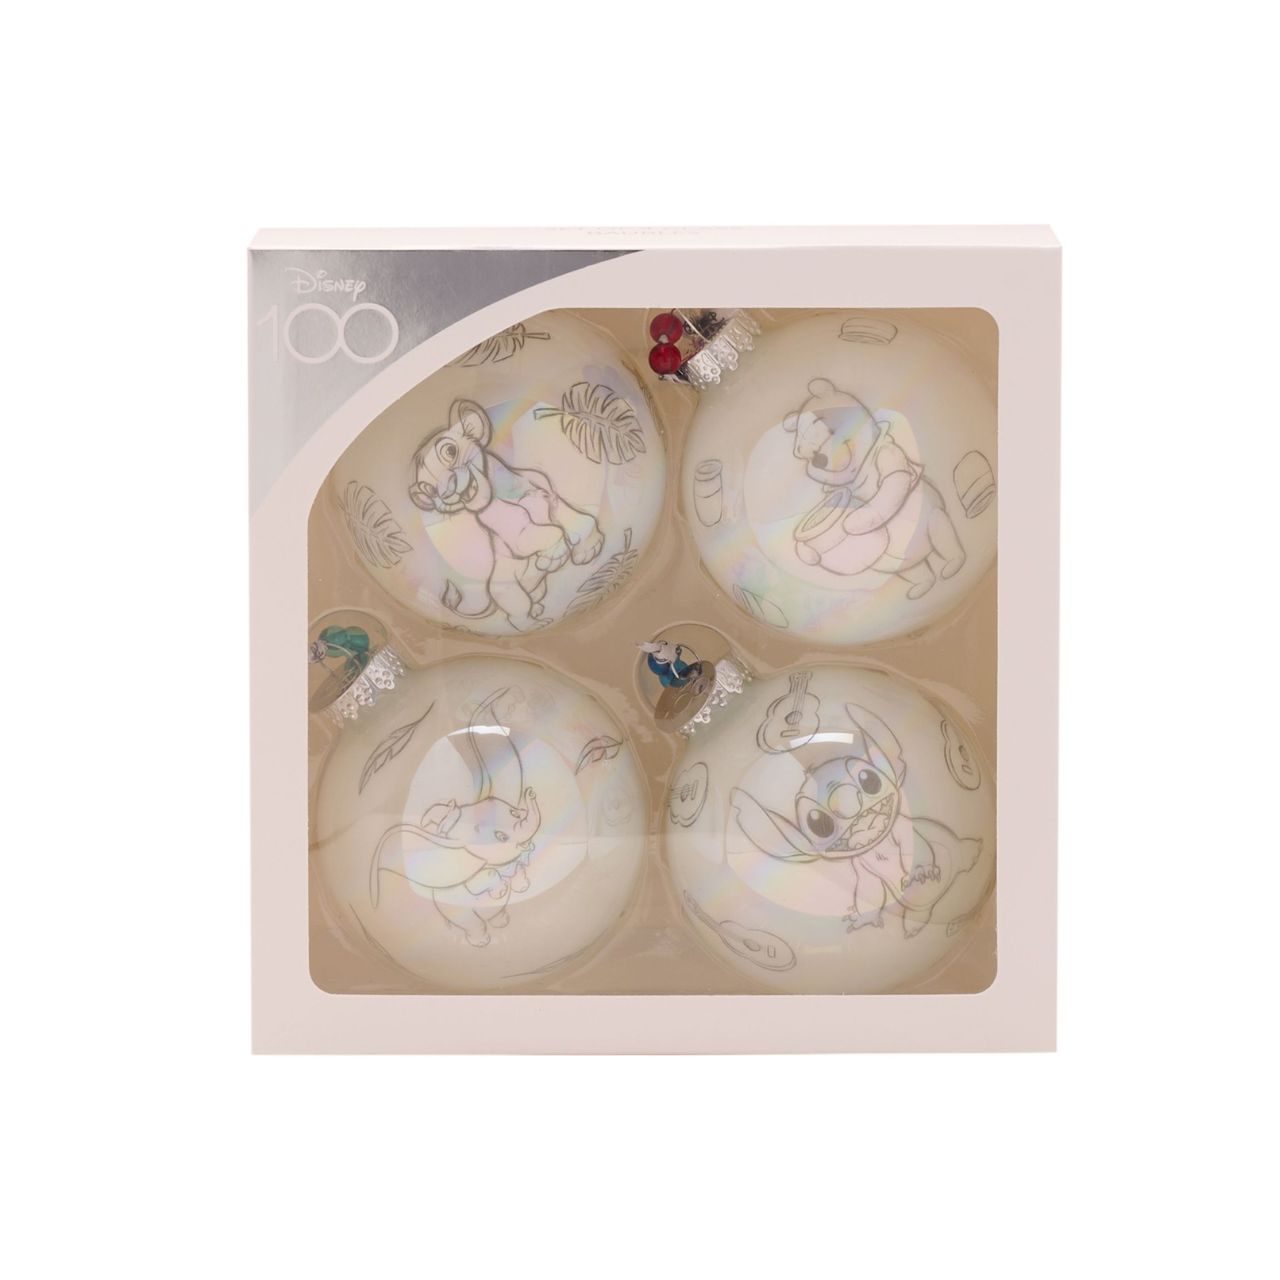 Disney 100th Anniversary Set of 4 Baubles - Classic  A set of 4 Classic baubles from Disney 100 by DISNEY.  These limited edition tree decorations capture the true magic of Disney on its centenary and can be enjoyed by fans of all ages at Christmas.